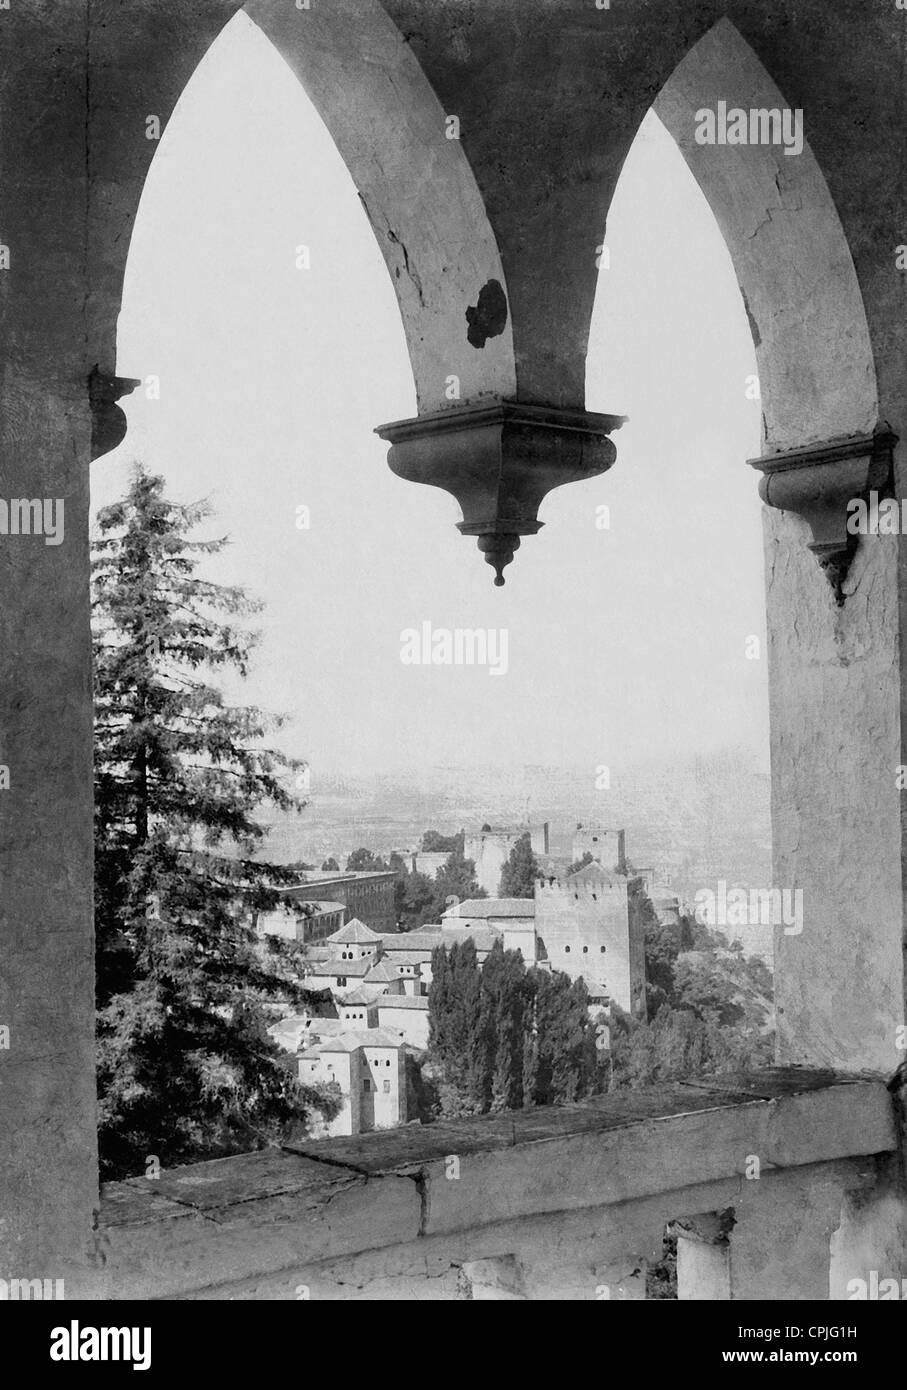 Views of the Alhambra, 1905 Stock Photo